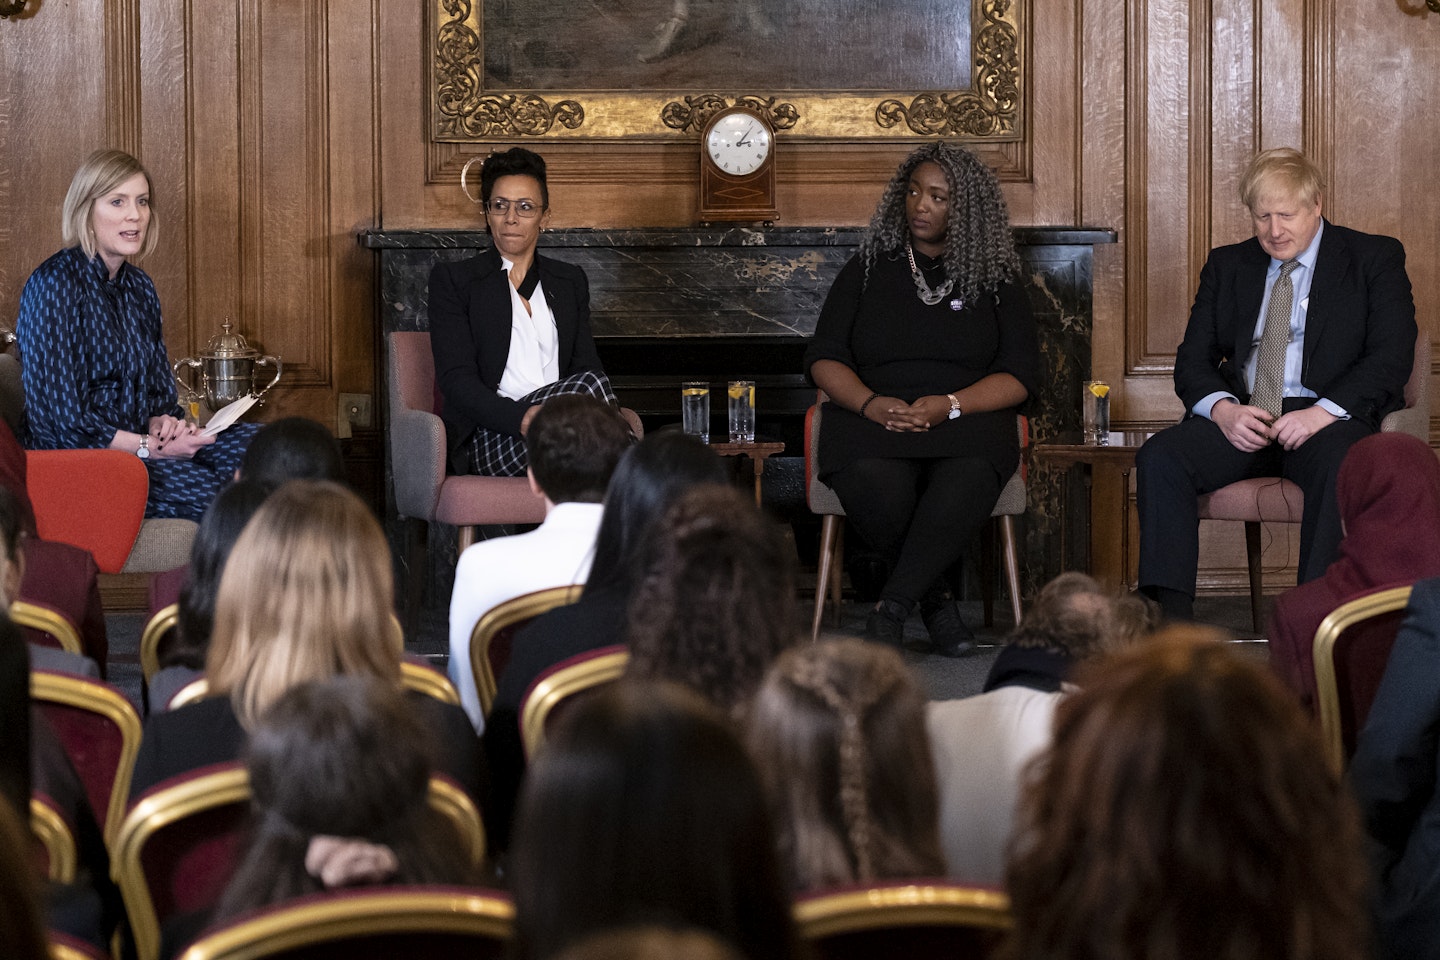 The International Women's Day Panel at Downing Street